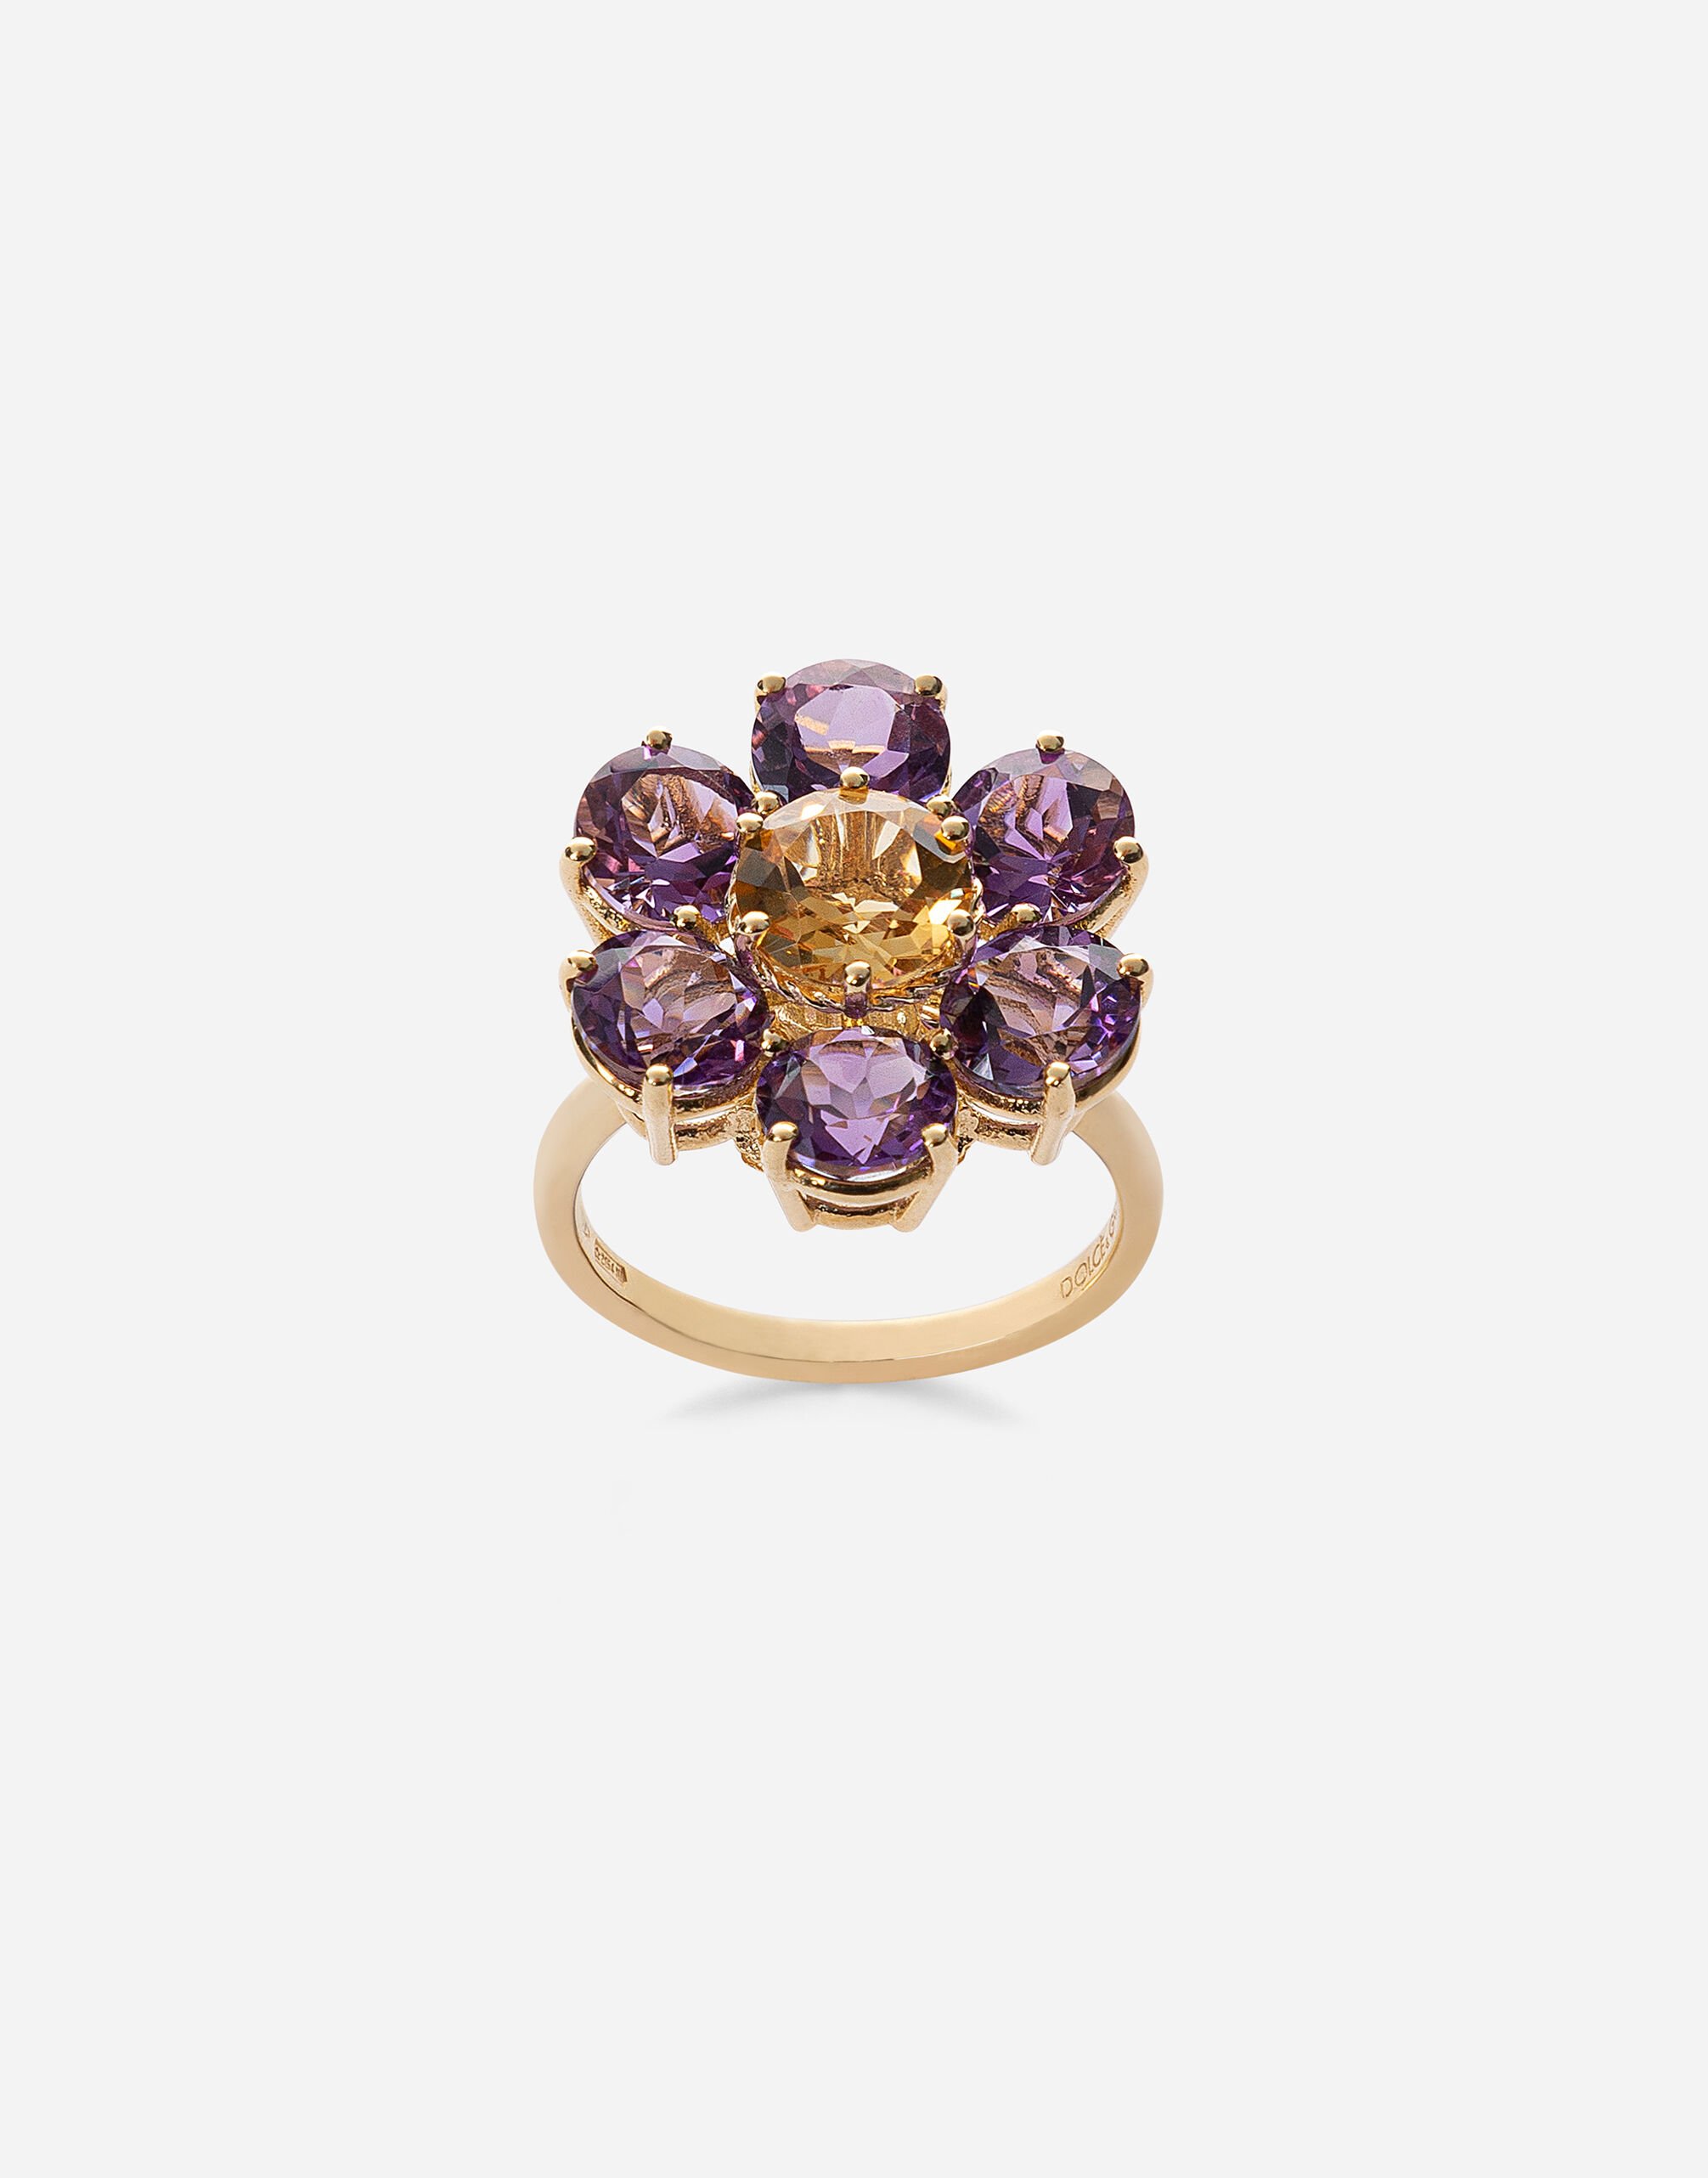 Dolce & Gabbana Spring ring in yellow 18kt gold with amethyst floral motif Gold WRMR1GWMIXU